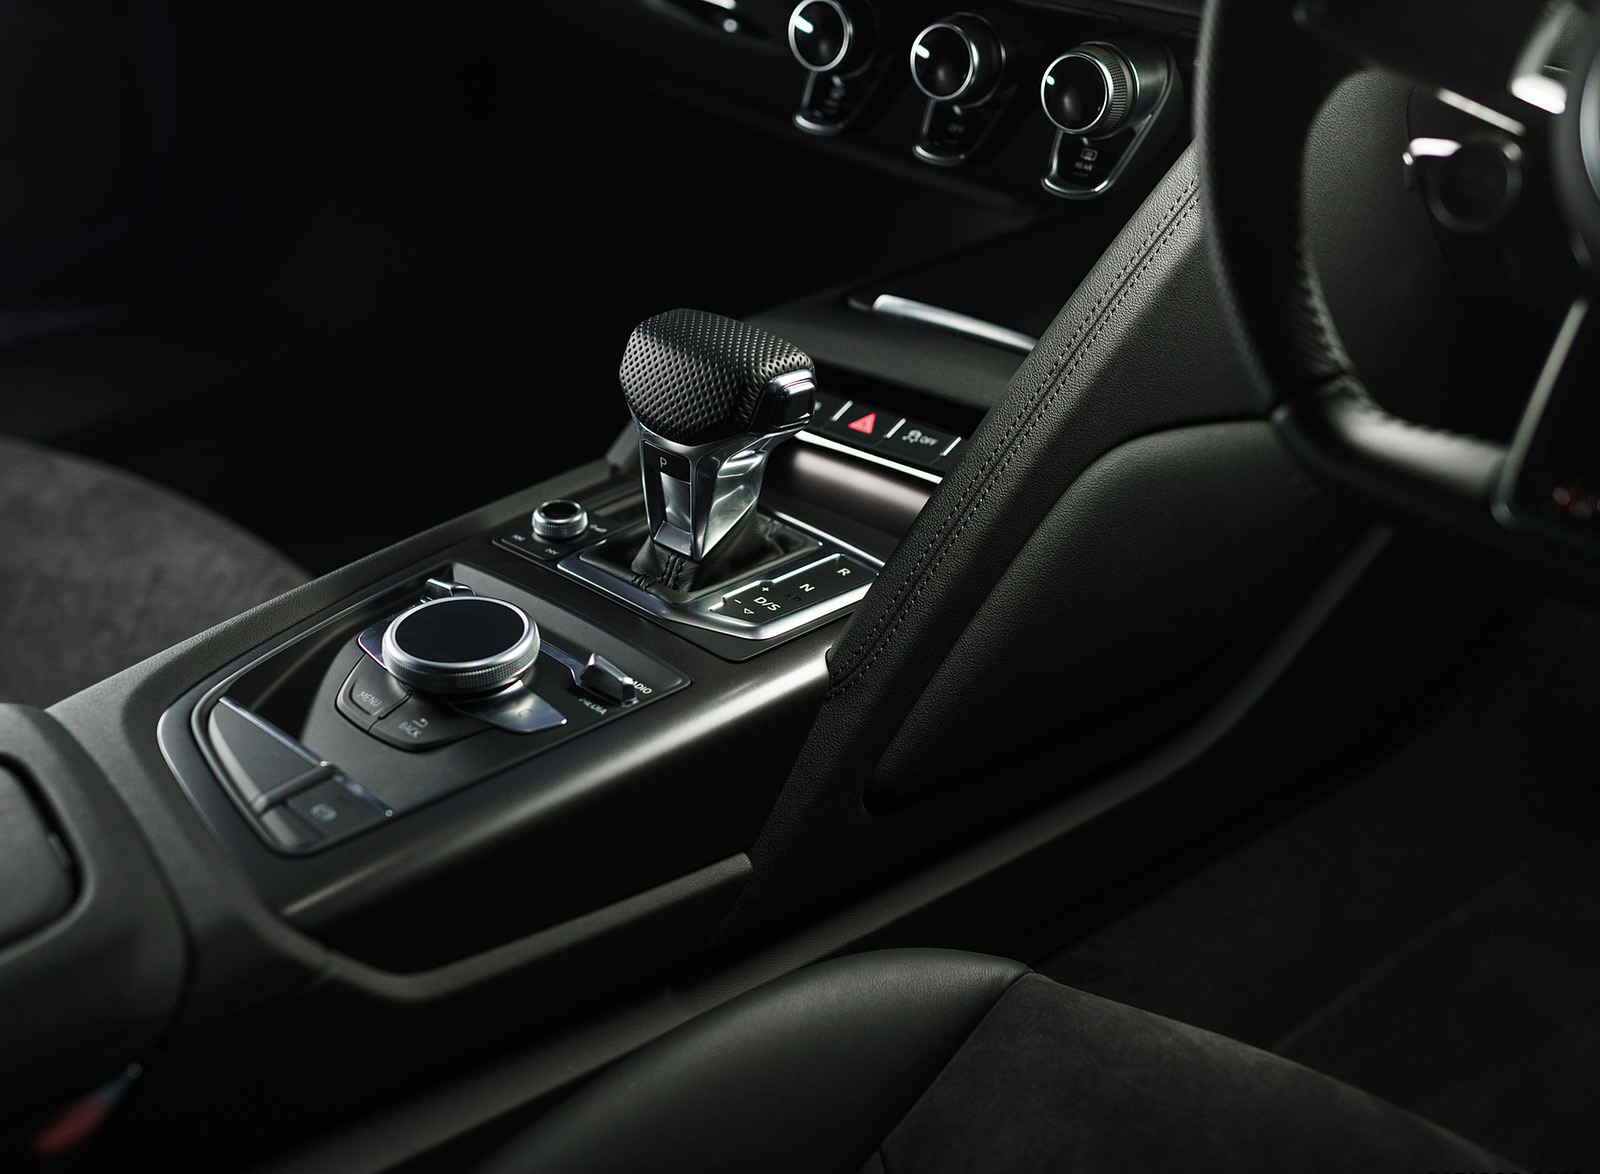 2020 Audi R8 V10 RWD Coupe (UK-Spec) Interior Detail Wallpapers #126 of 151